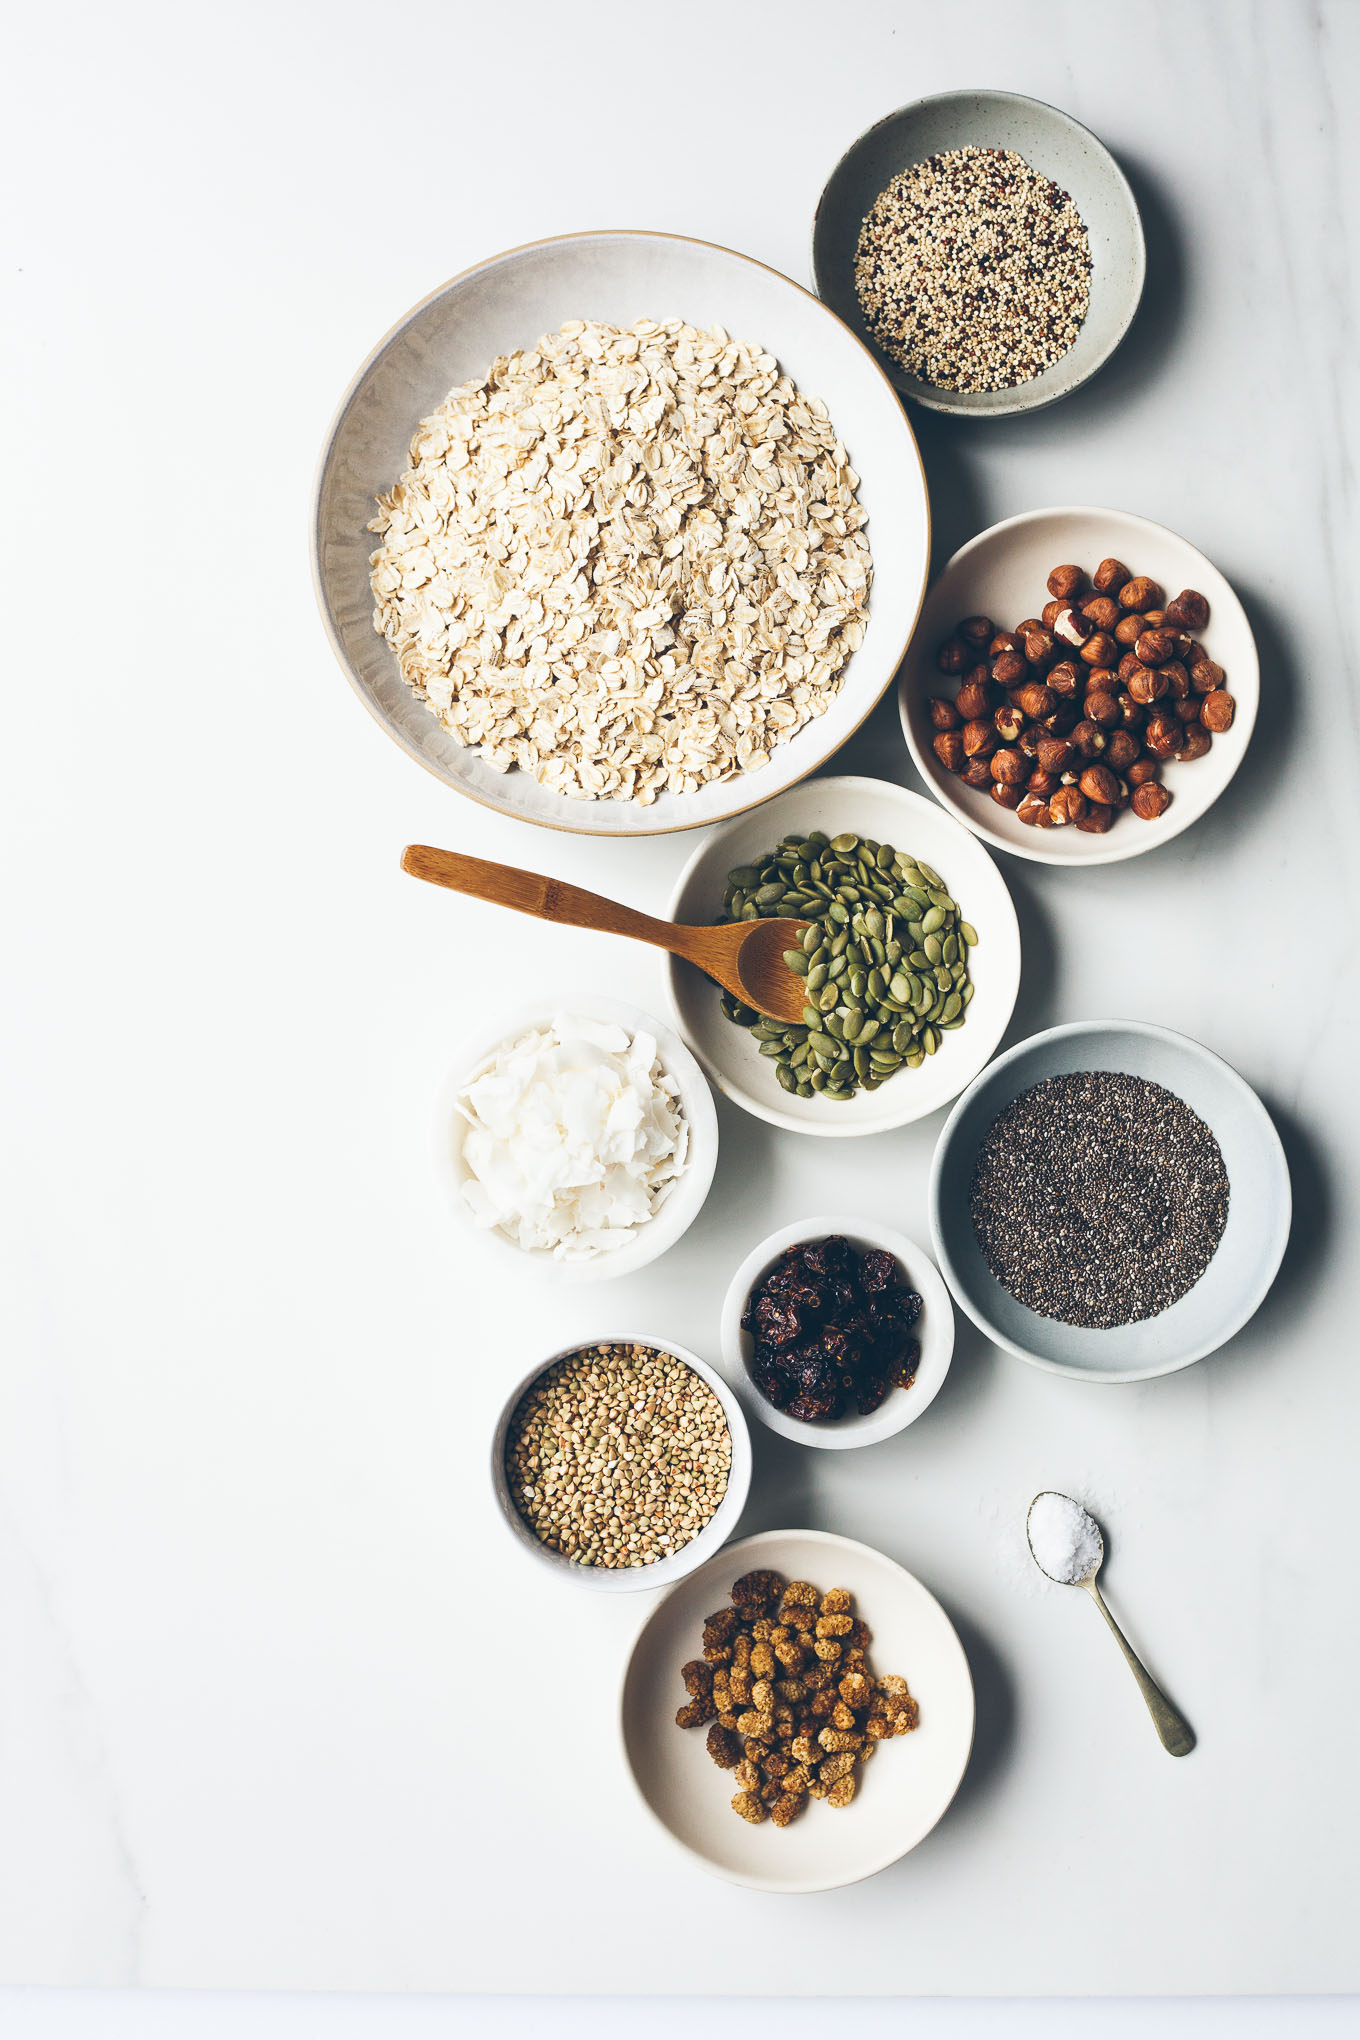 Overhead shot of bowls of ingredients for making granola